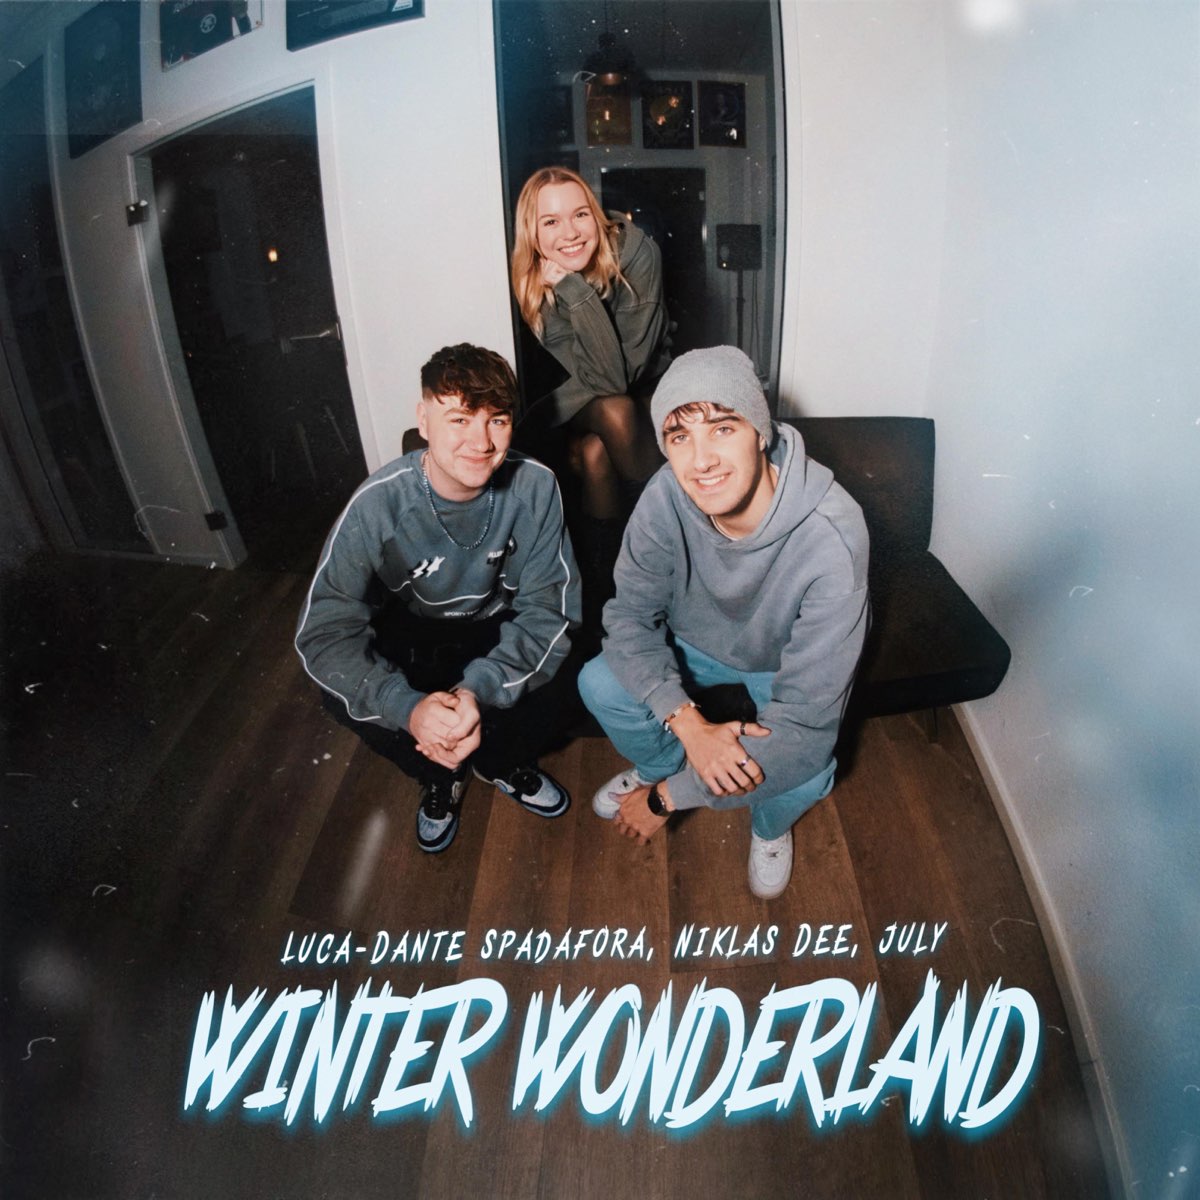 #WinterWonderland by #LucaDanteSpadafora, #NiklasDee and #July is out in #DolbyAtmos! Mixed by #MatthiasStalter and #ChristophThiers for #ThreeDeeMusic. Released by #ZeitgeistRecords, #VirginRecords and #UniversalMusicGermany. Available on #AppleMusic, #AmazonMusic and #Tidal.